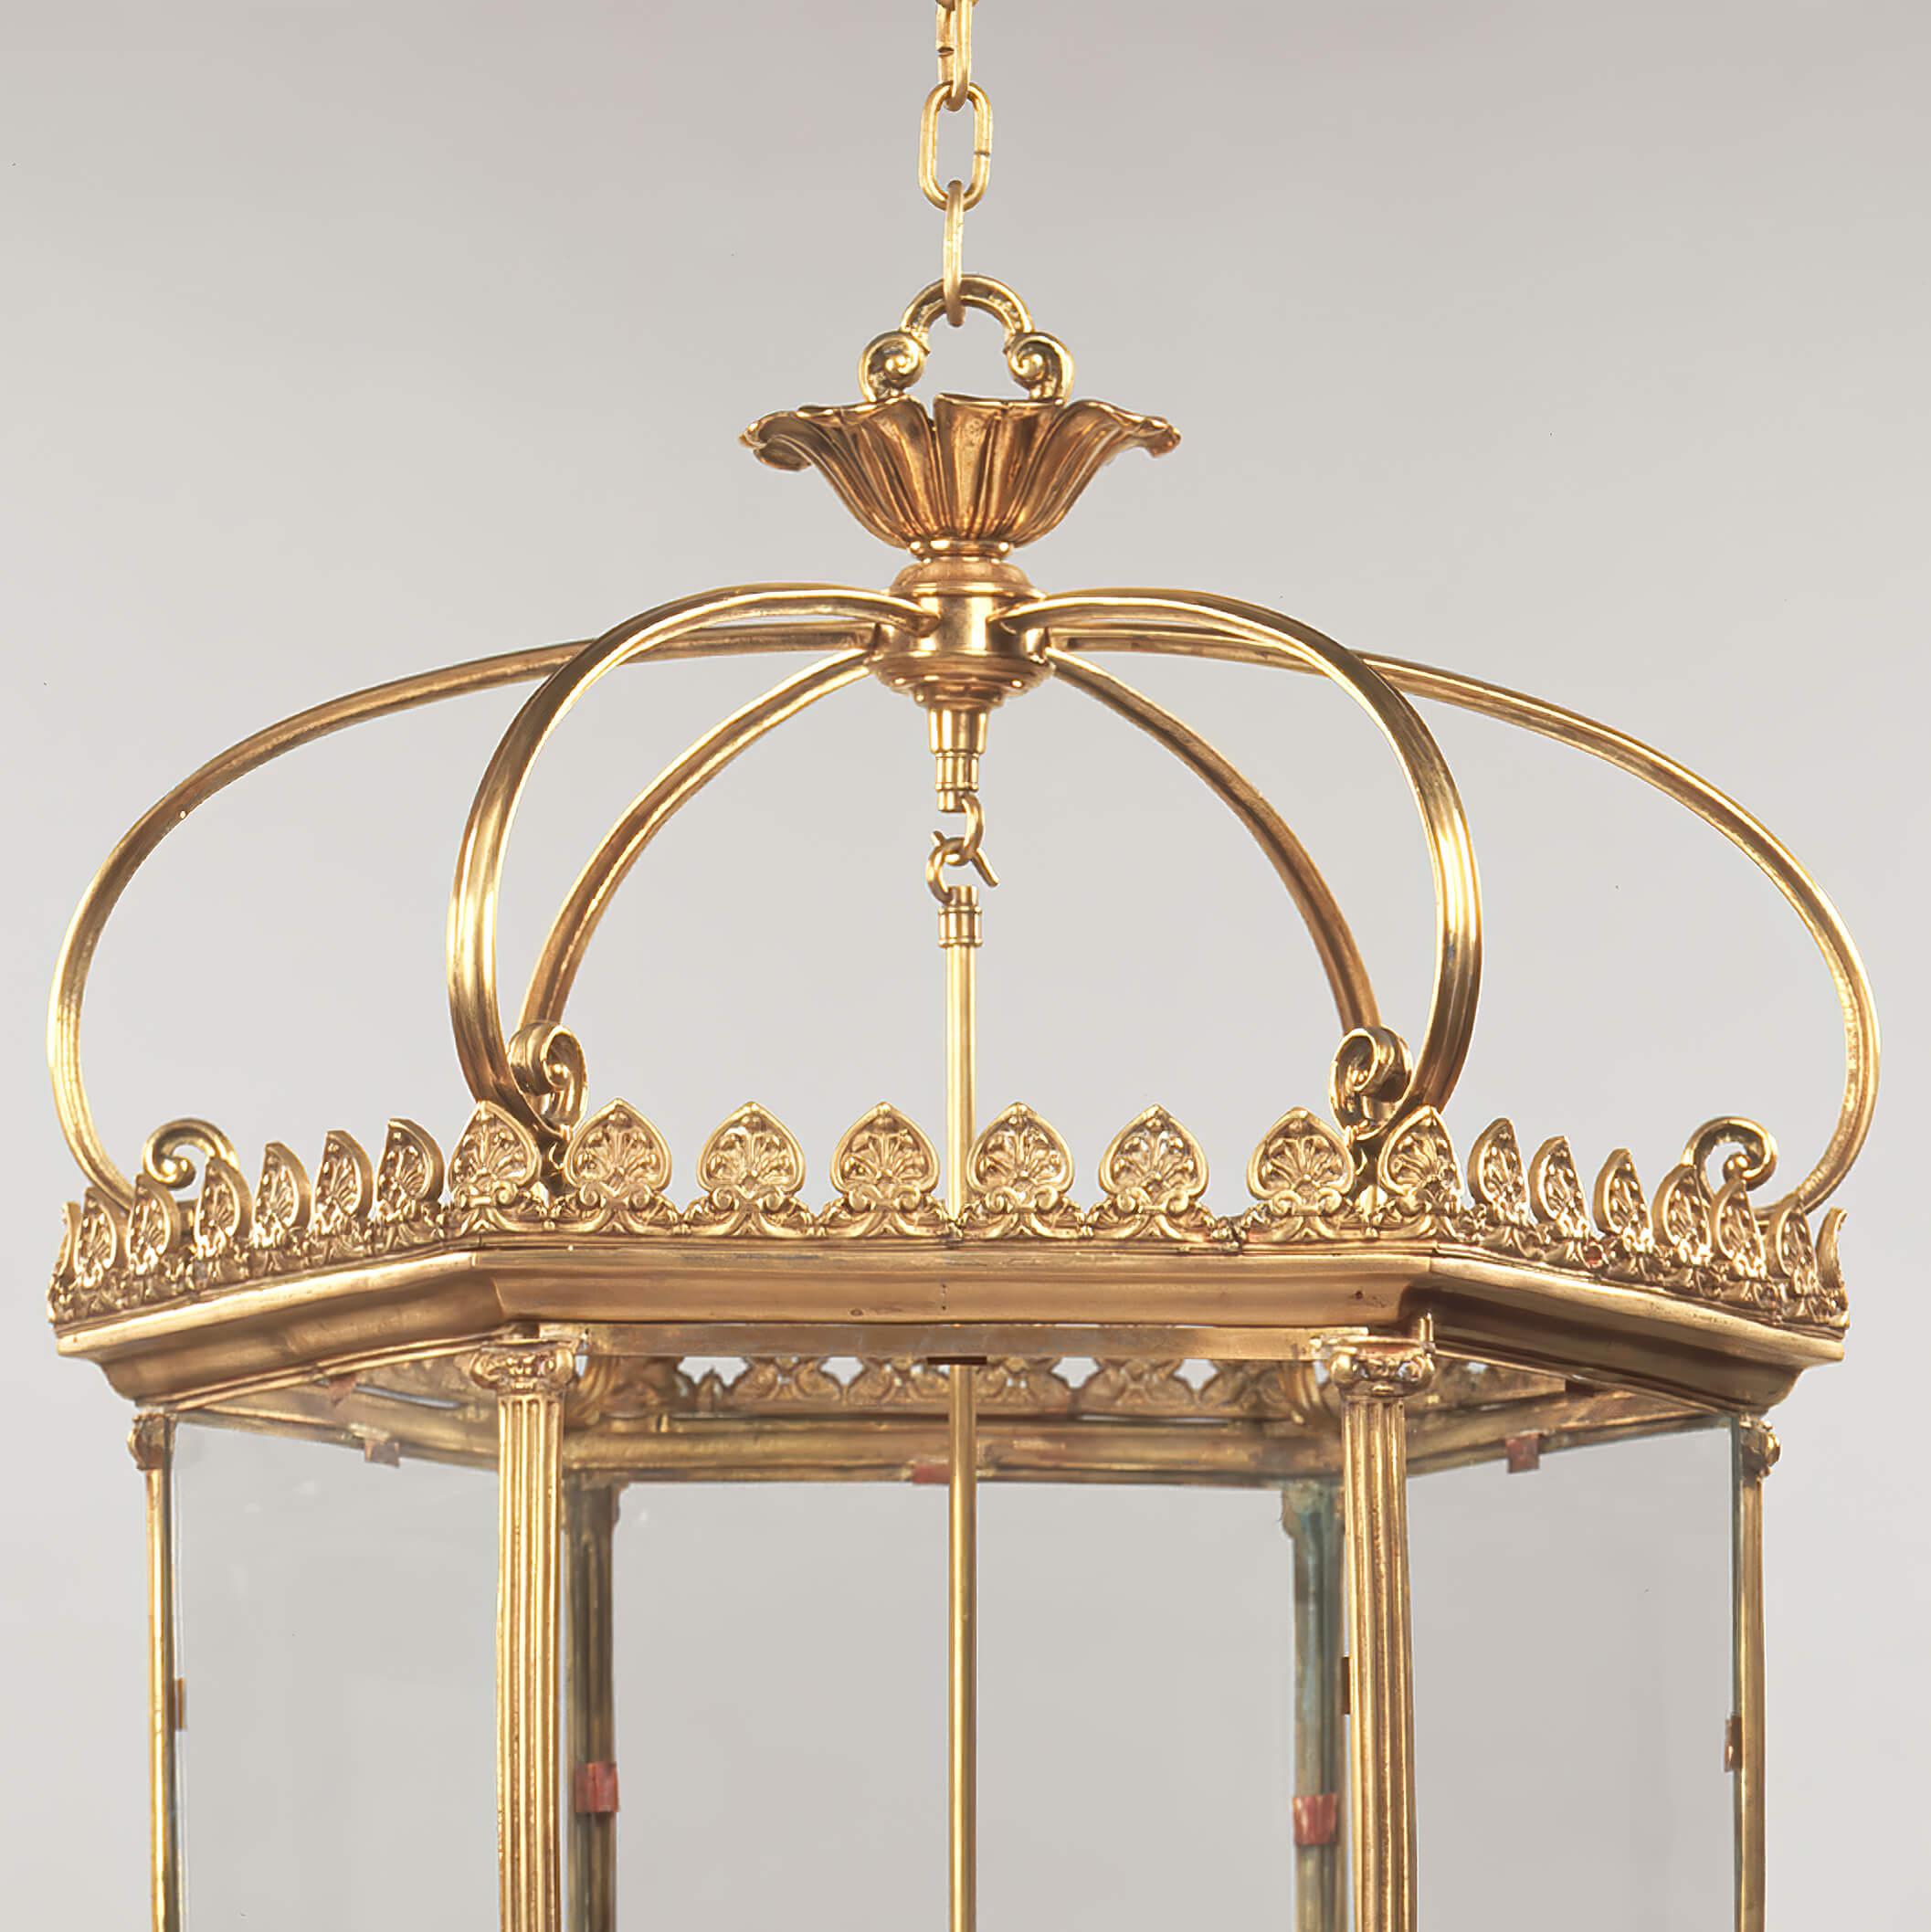 A Grand Georgian style hexagonal six-light hall lantern with a regal crown above a fleur-de-lis decorated gallery with six glass panels, an opening door, framed by Roman Ionic columns with drop finials.

Dimensions: 25